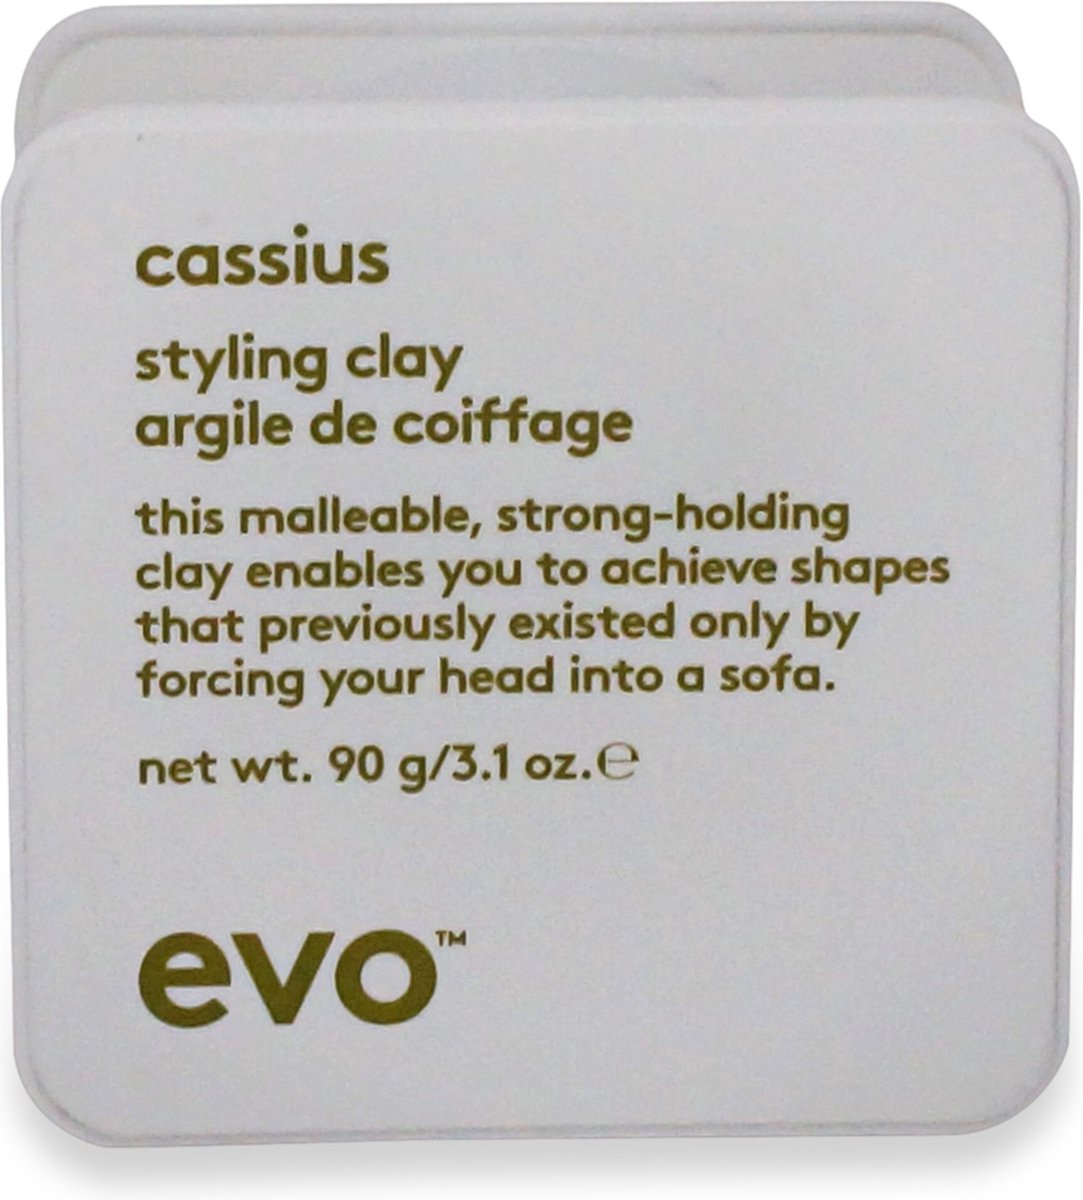 EVO Cassius Styling Clay